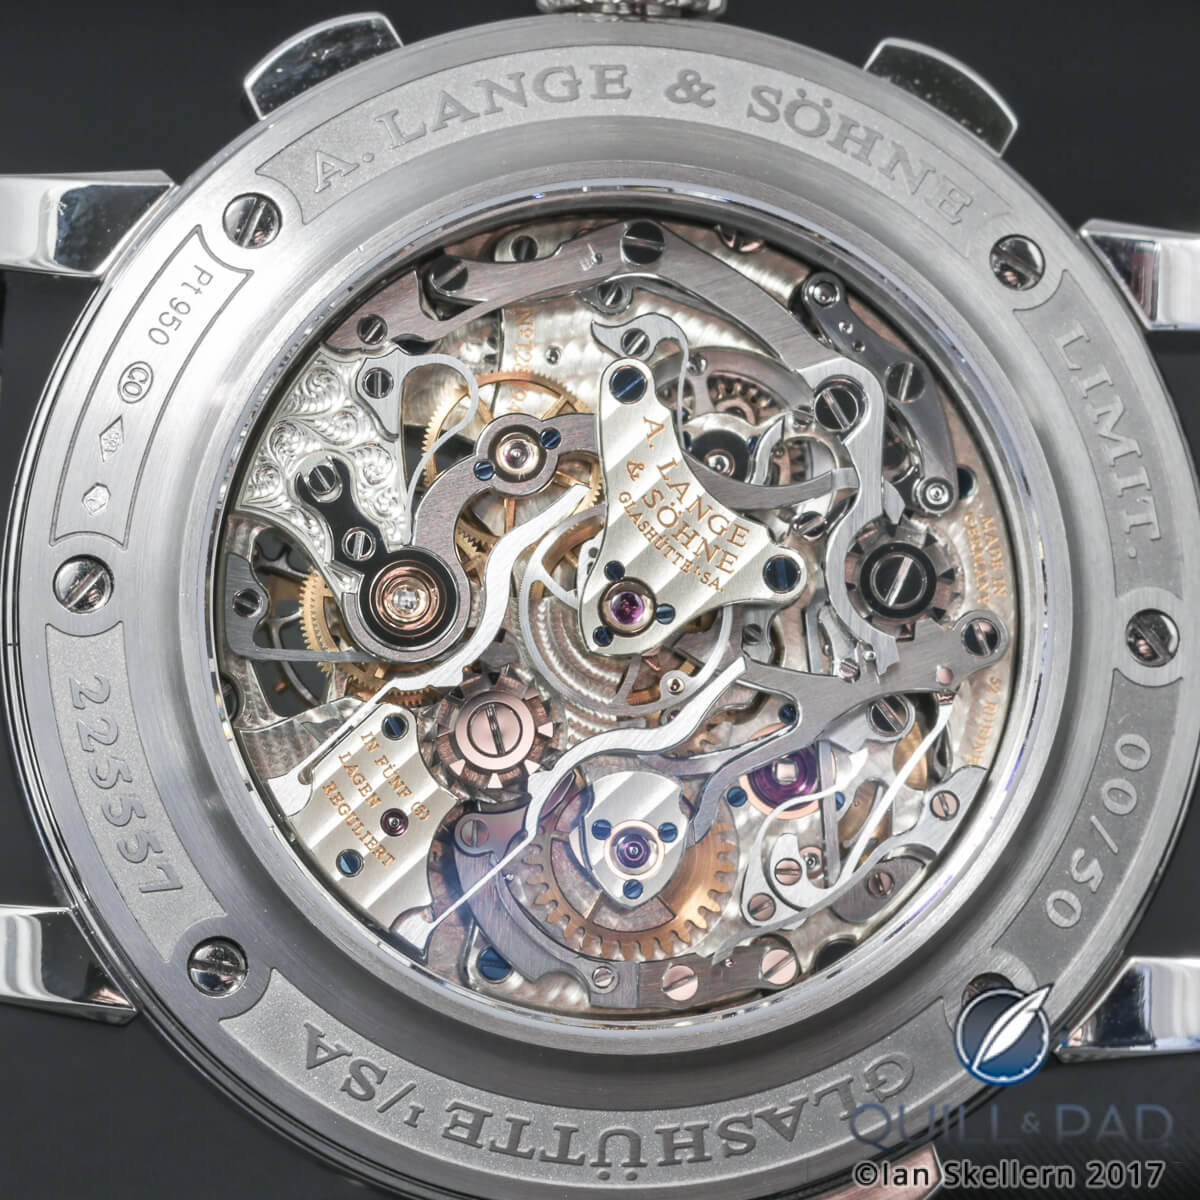 Beautifully finished movement of the A. Lange & Söhne Tourbograph Perpetual Pour le Mérite